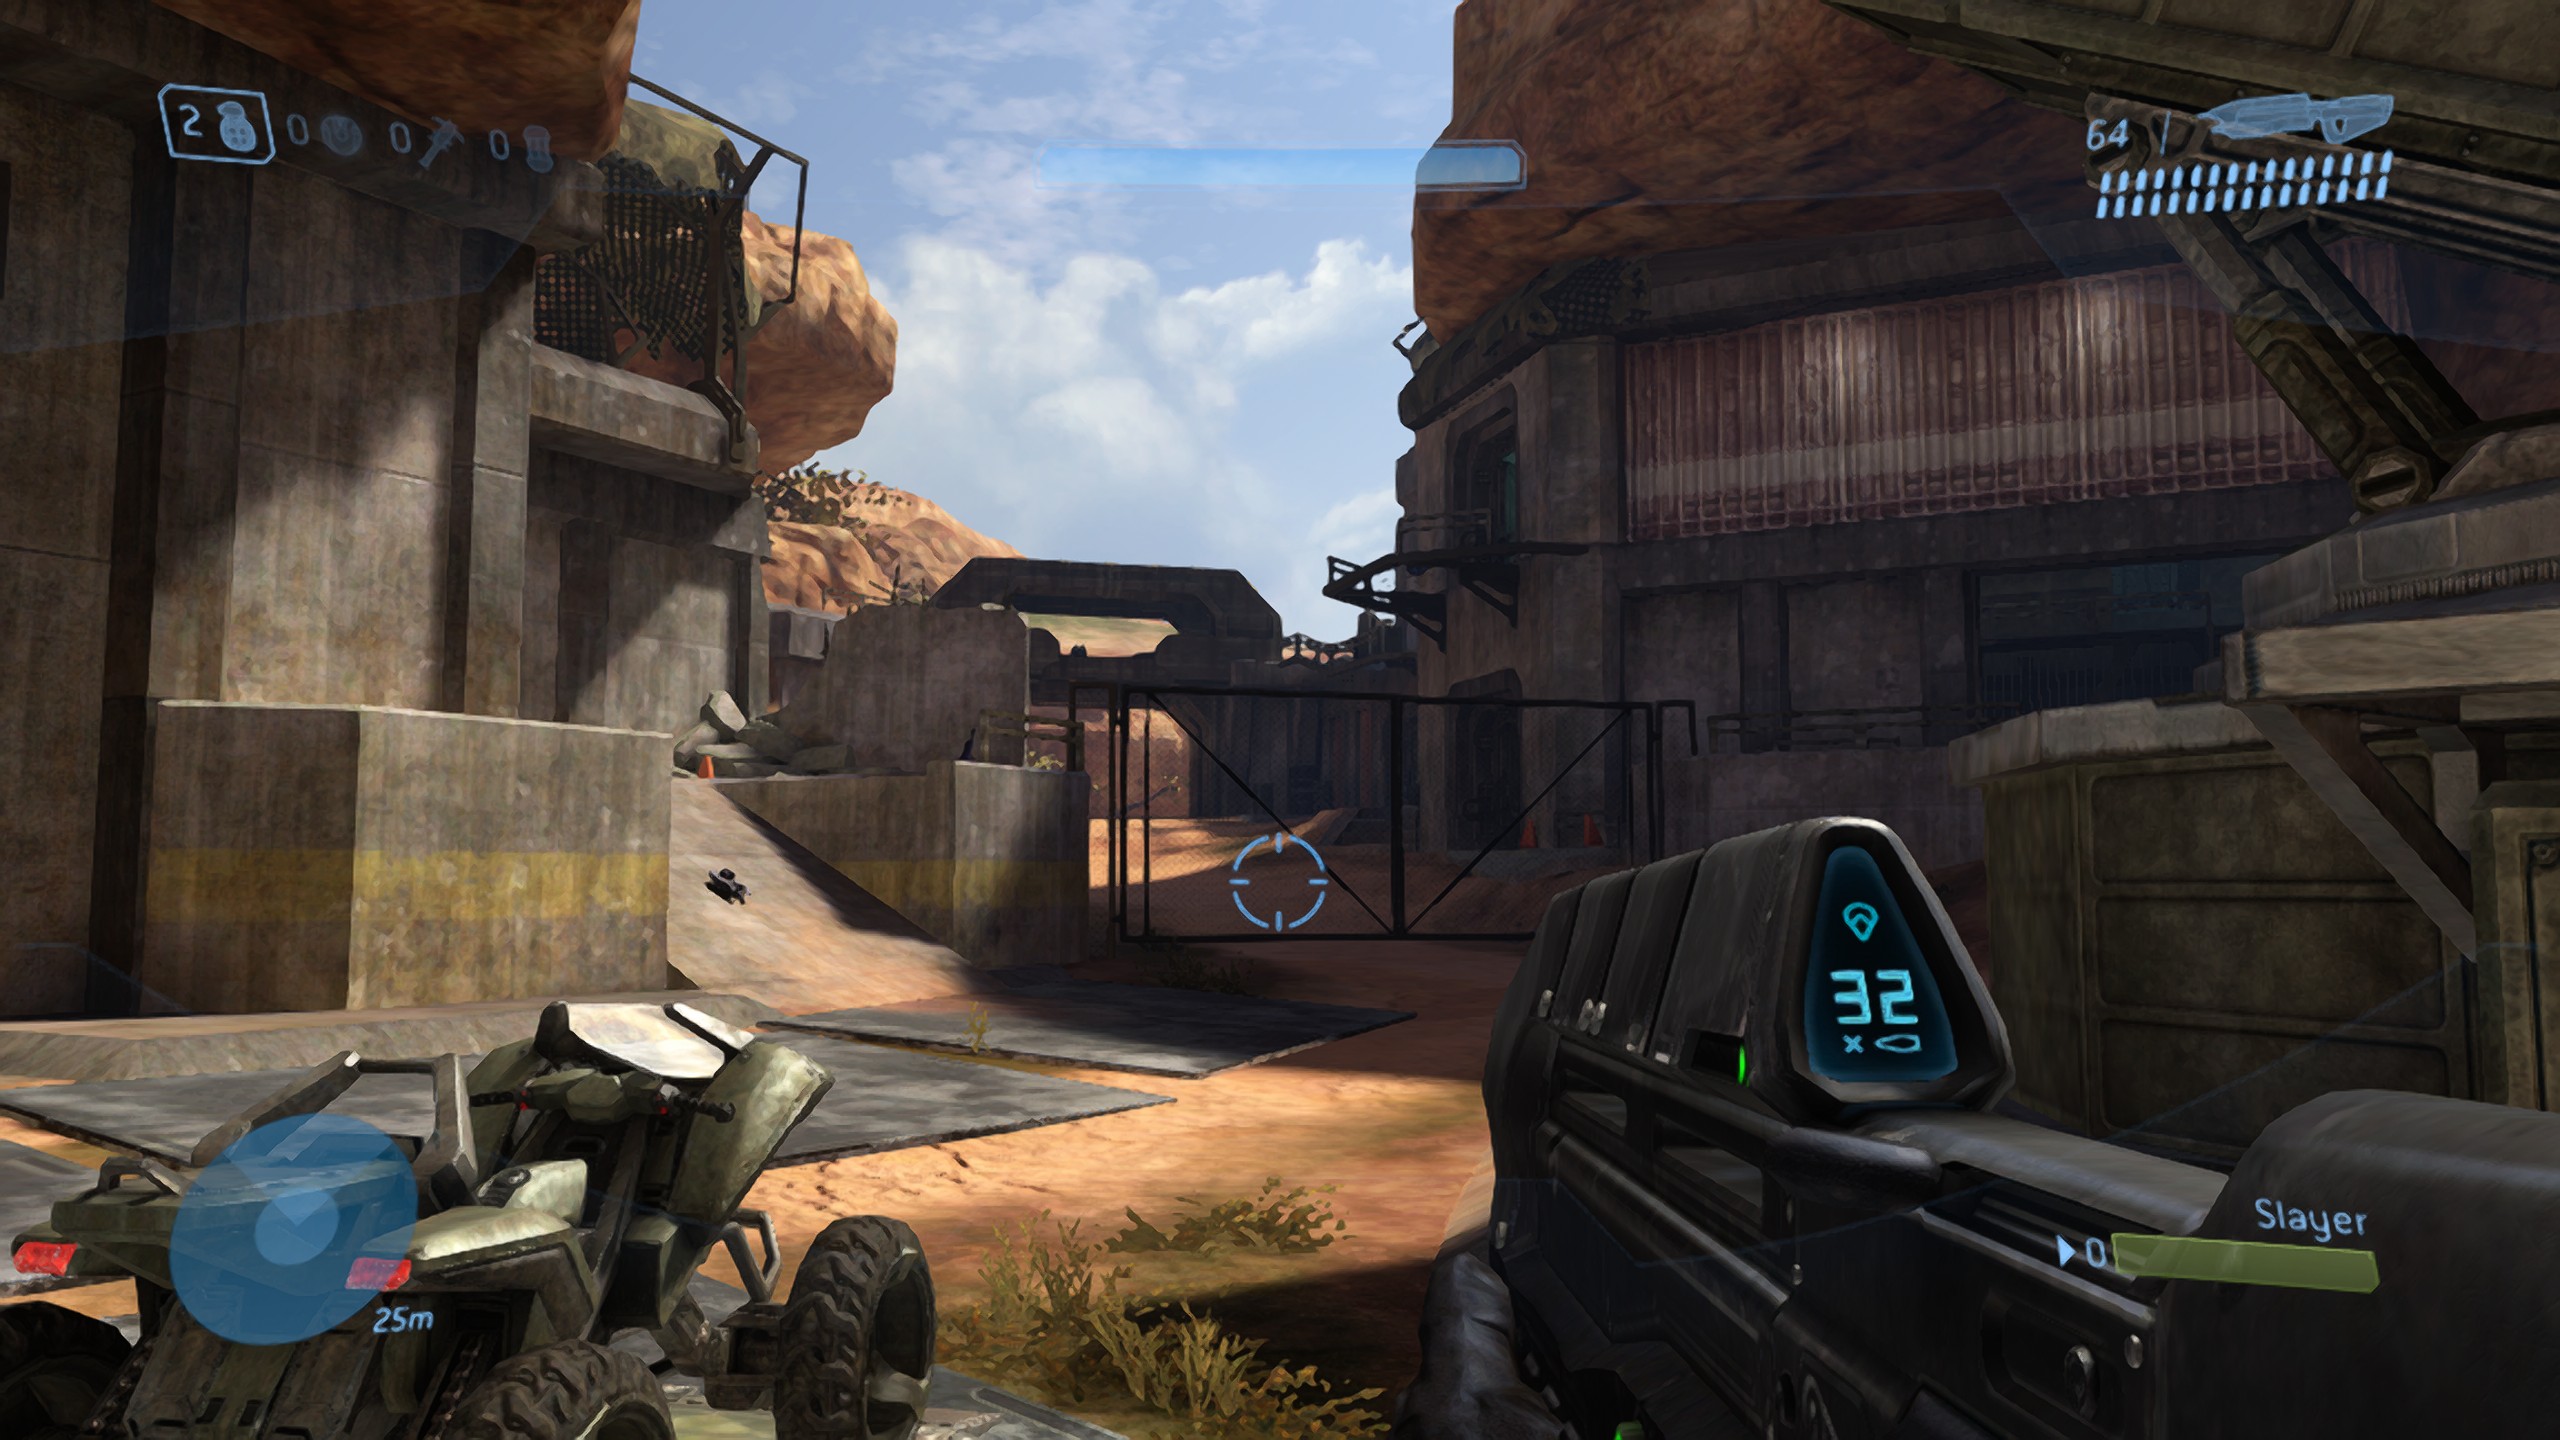 Halo 3 with 1x1 resolution scale, no in-game AA, extreme quality FXAA, 1152x640 upscaled to 2304x1280 and then to 2560x1440 by FSR